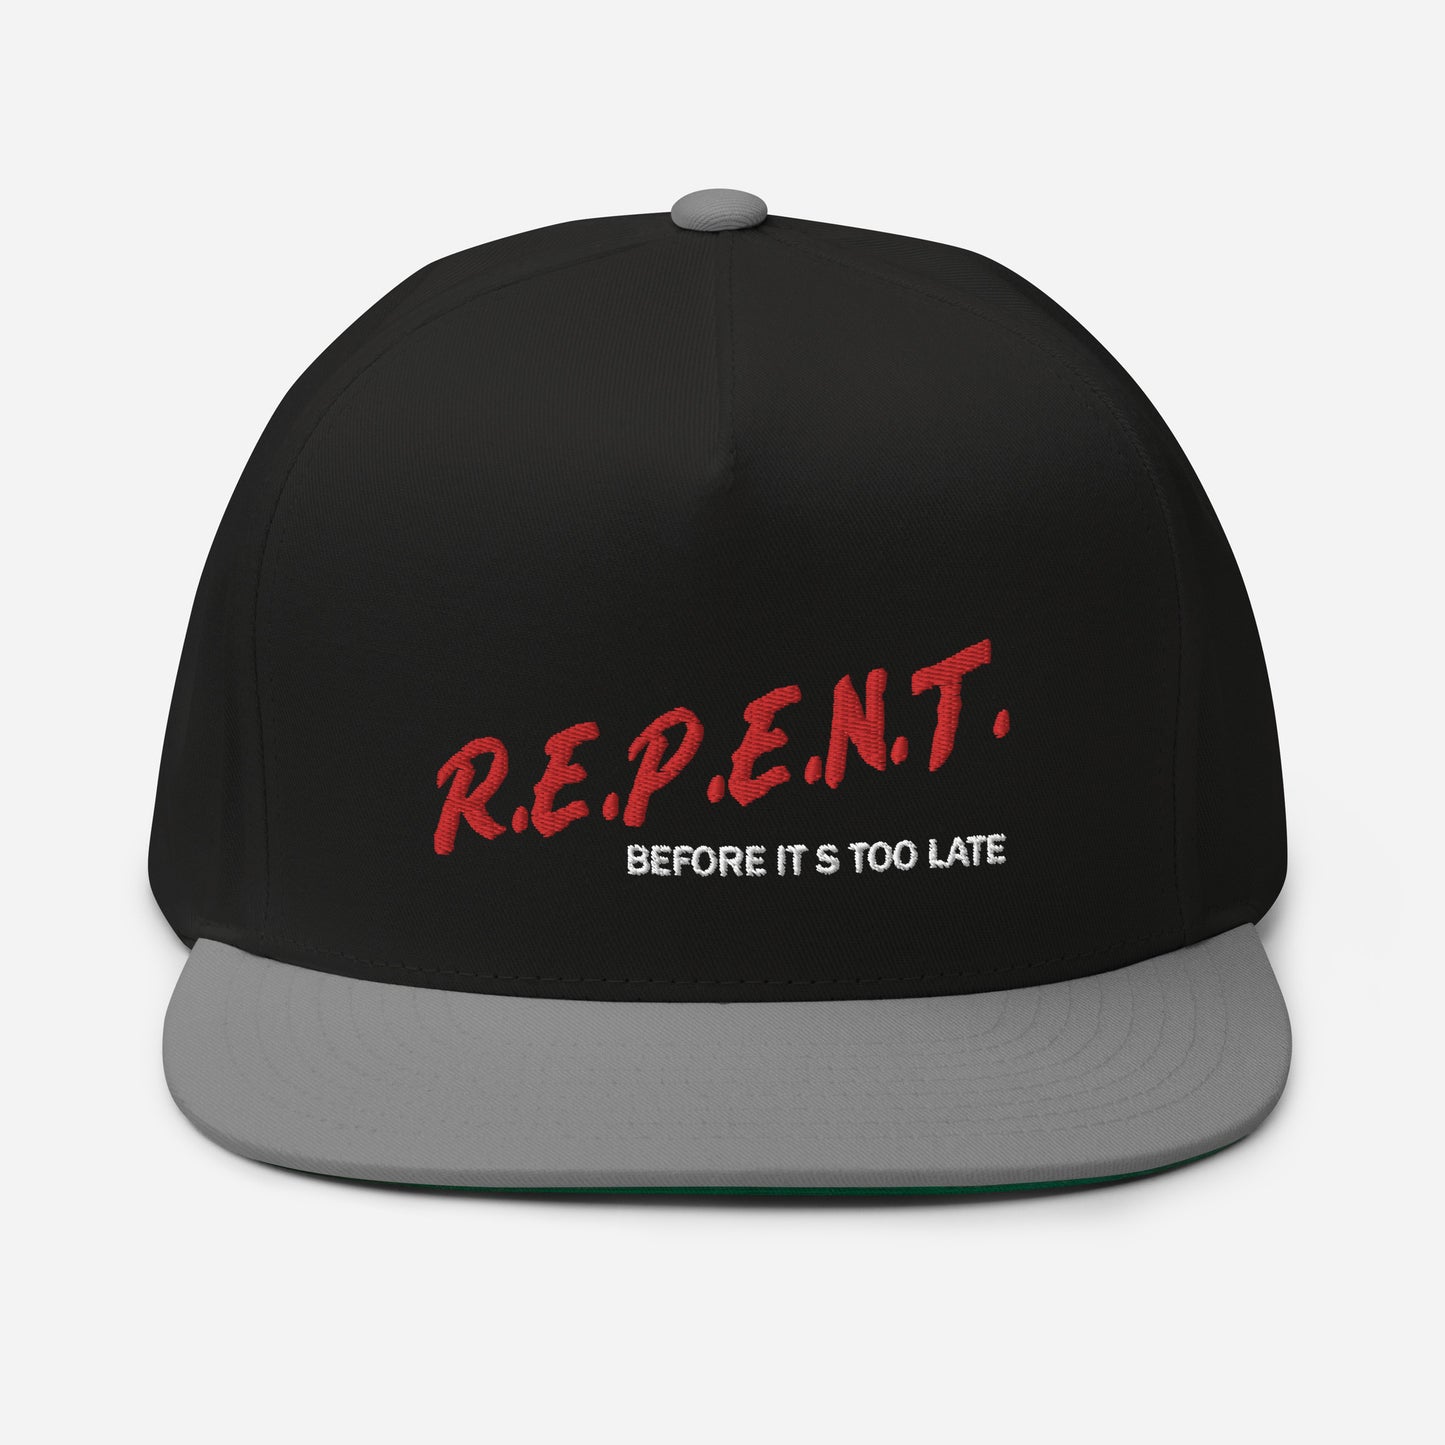 Repent...Before It's To Late Flat Bill Cap